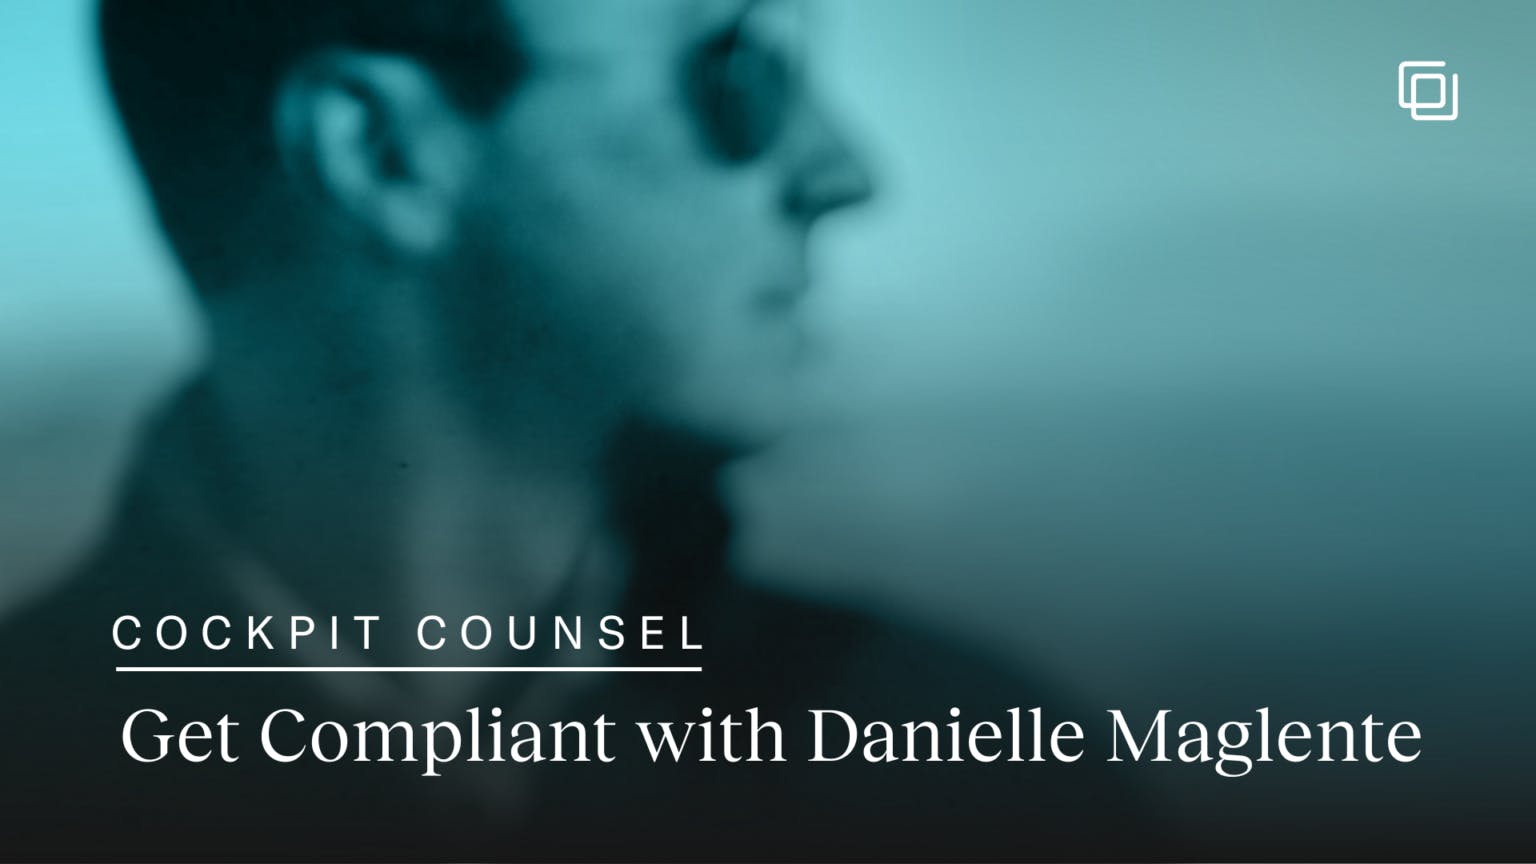 Cockpit Counsel: Get Compliant with Danielle Maglente